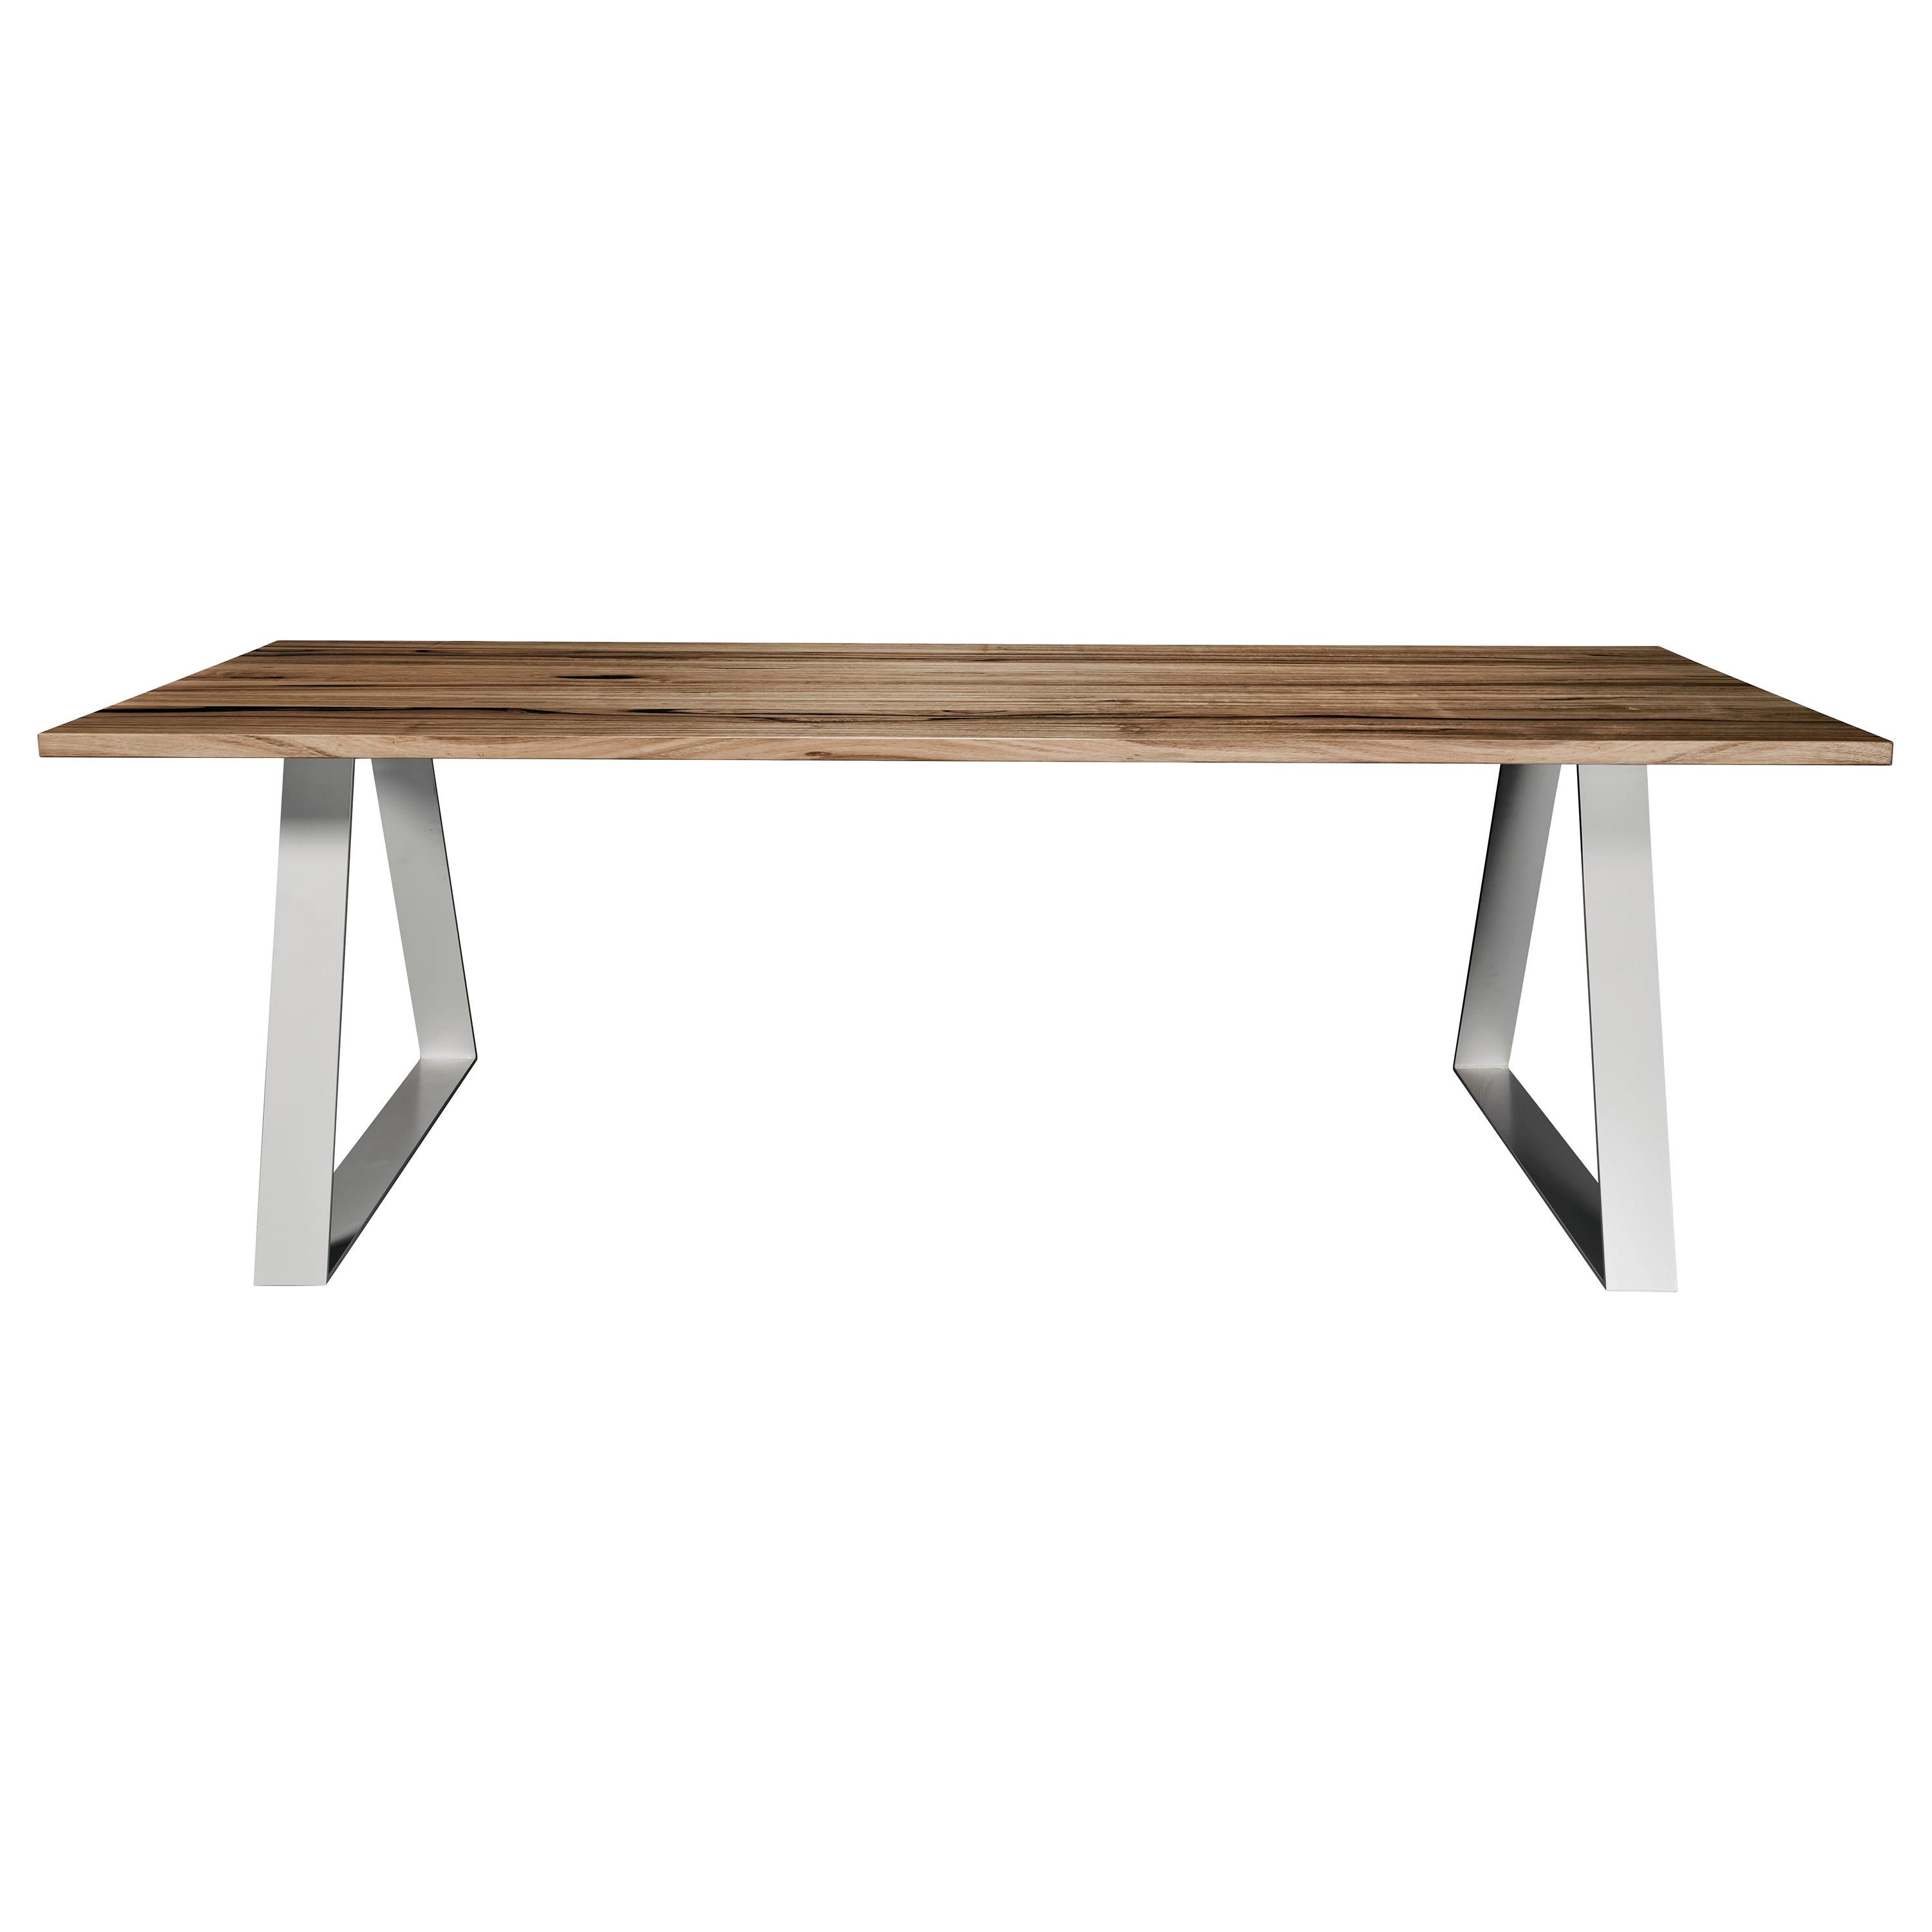 Aurora Dining Table, Handcrafted in Tasmanian Messmate Hardwood For Sale